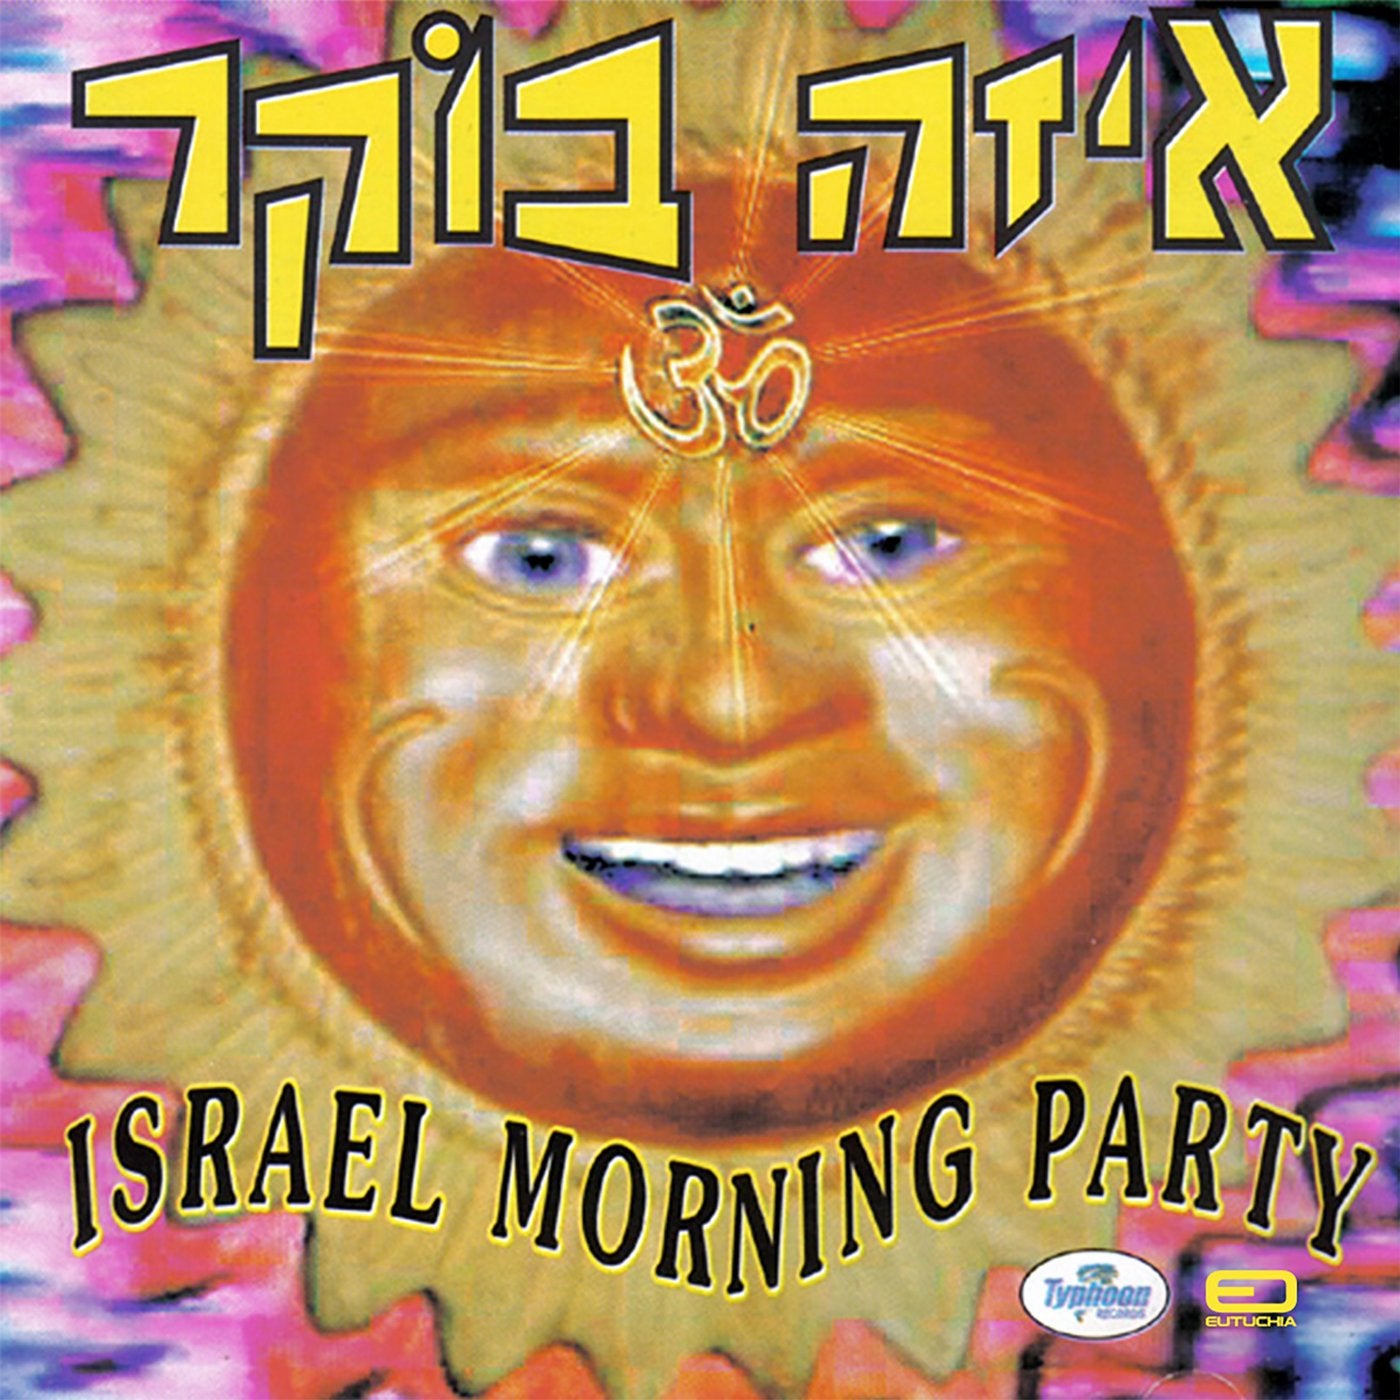 Israel Morning Party